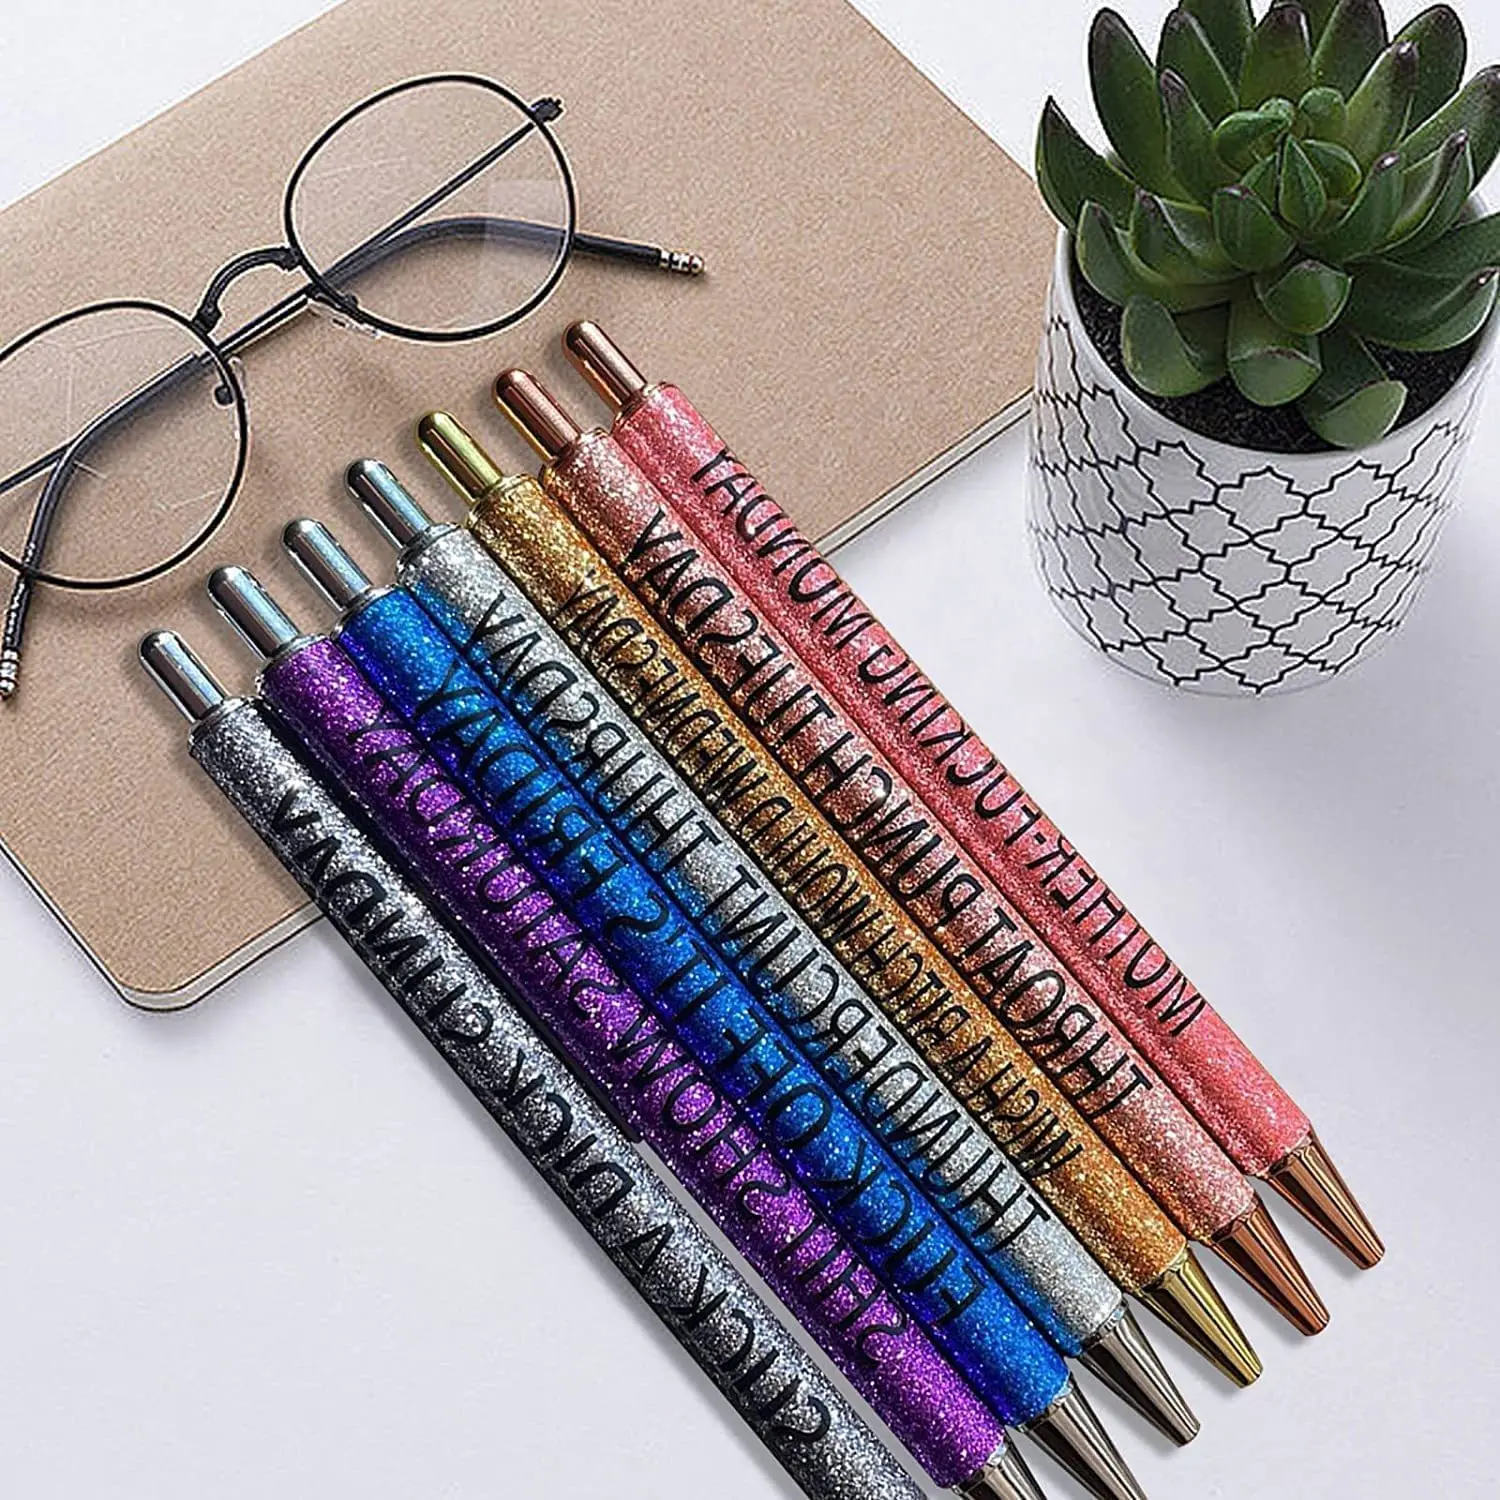 7pcs Funny Pens-Swear Word Daily Pen Set Irty Cuss Word Pens for Each TOP